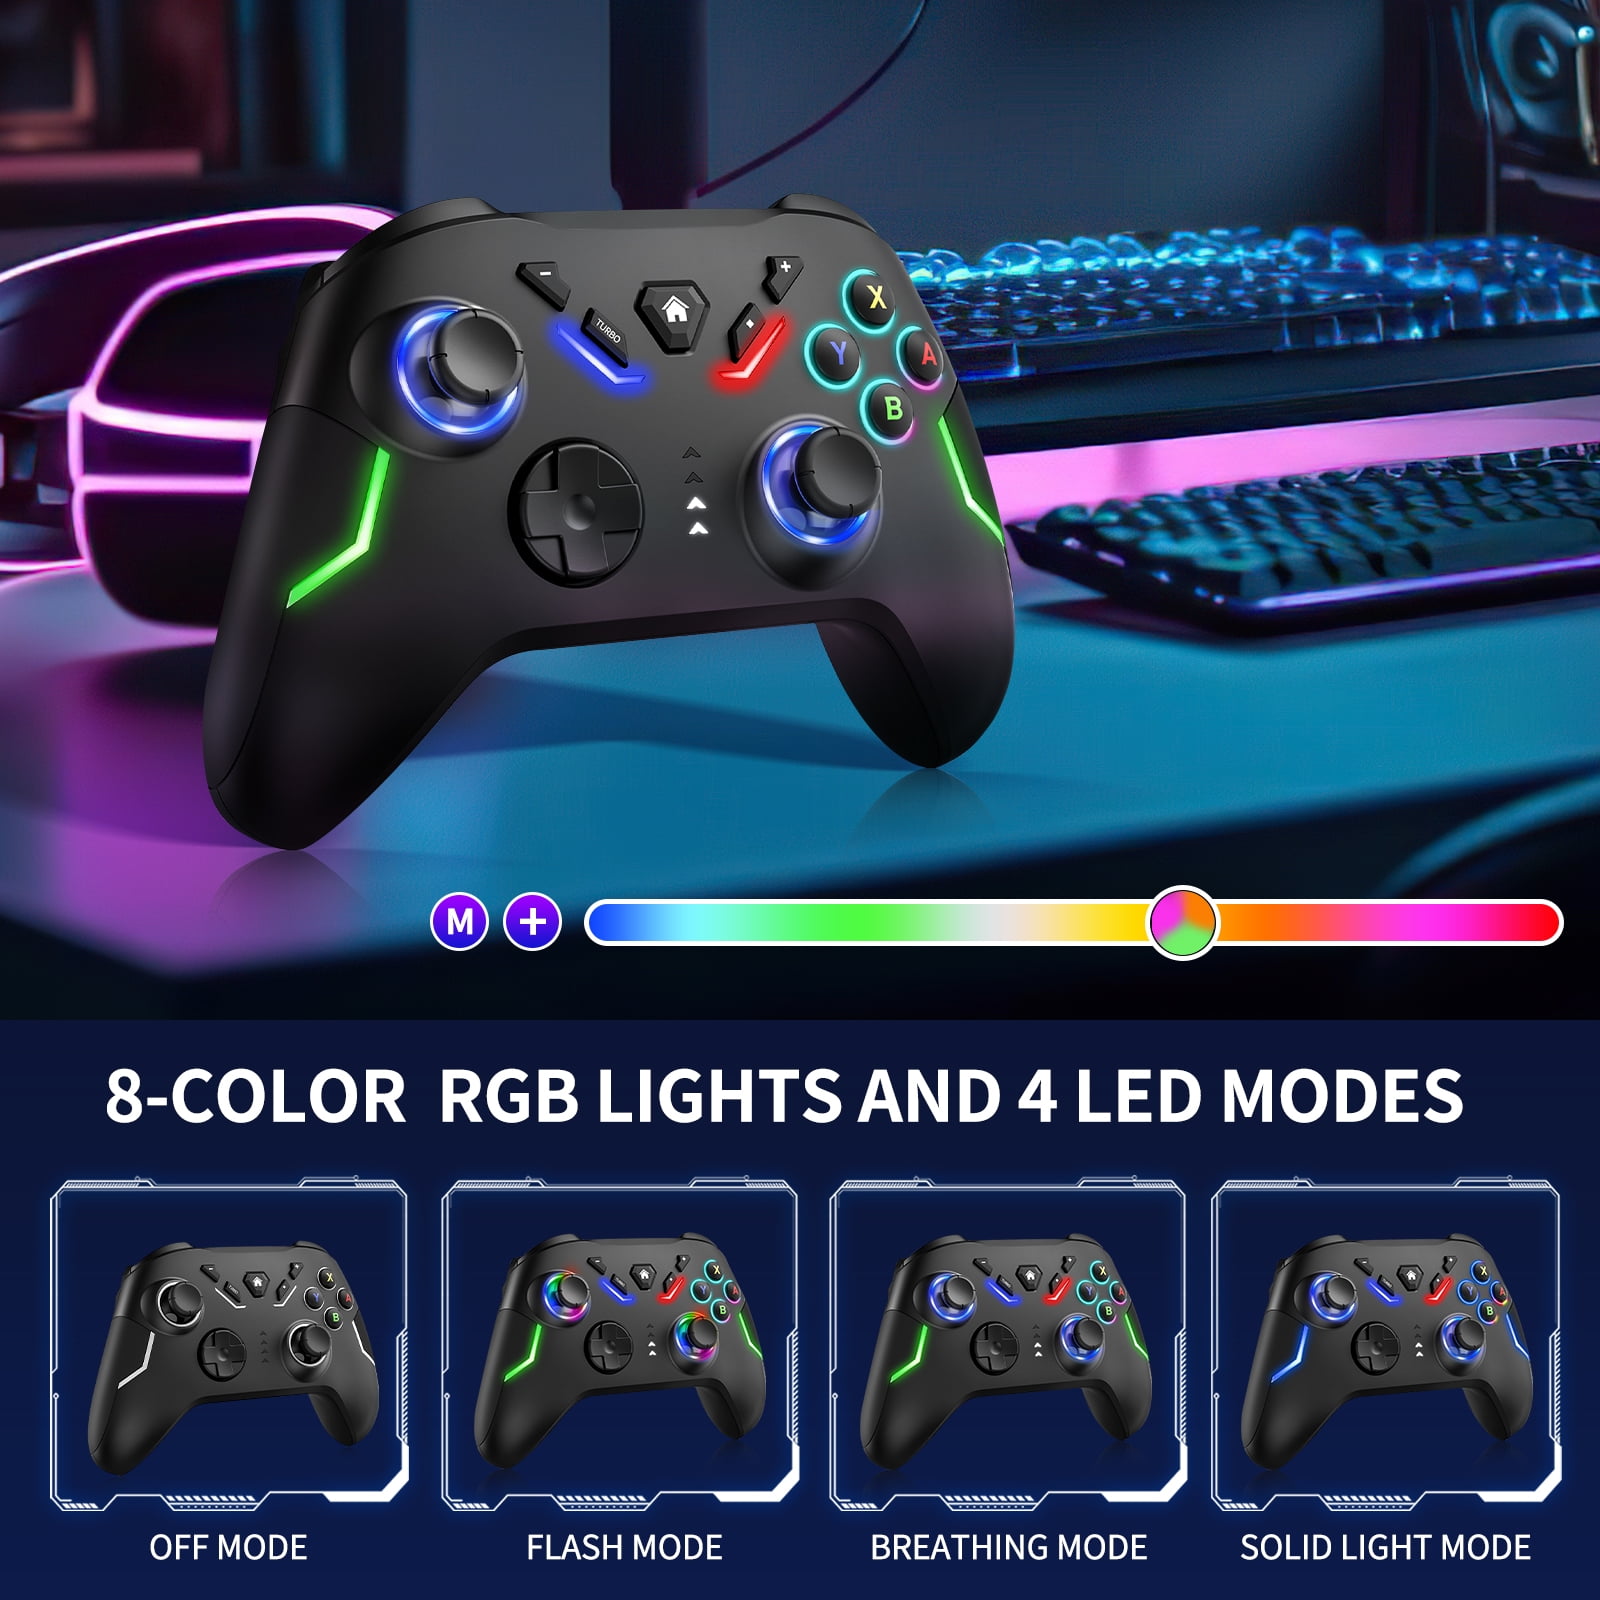 Htq Wireless Switch Pro Controller for Nintendo Switch/Switch Lite/Switch OLED, Switch Remote Gamepad with Unique Crack RGB Lights Turbo Dual